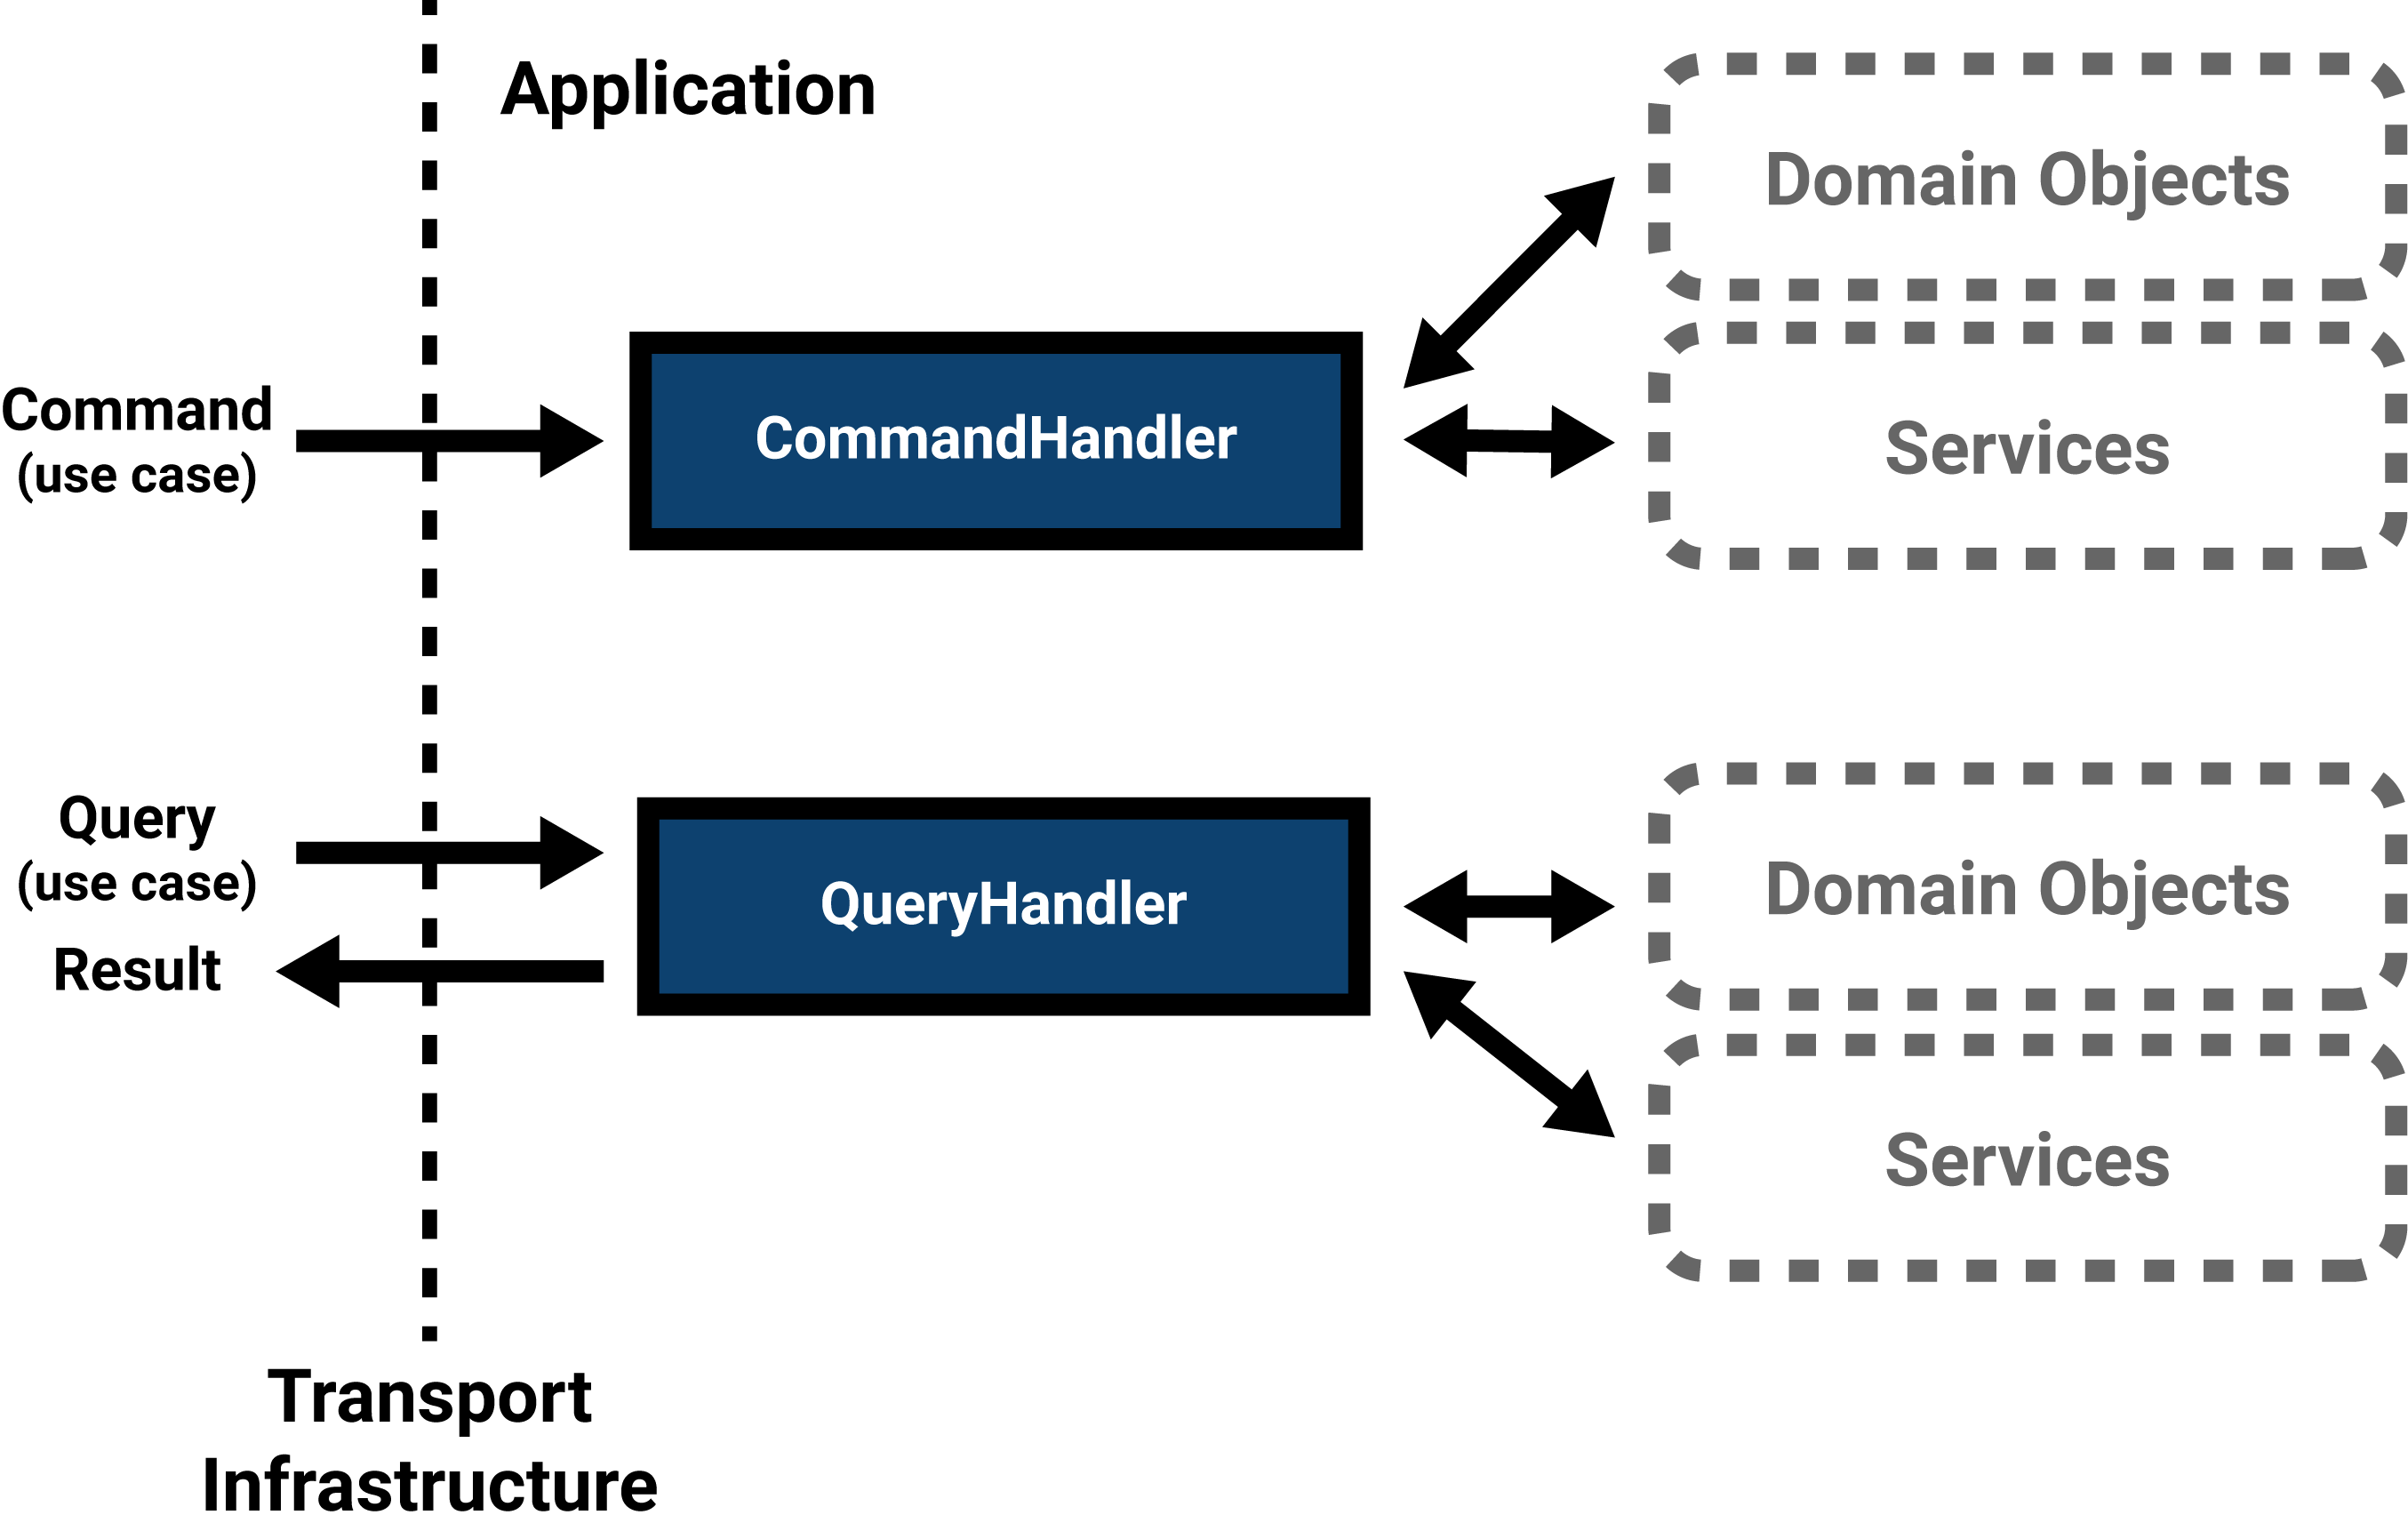 Handlers handle use cases and orchestrate domain objects and infrastructure interaction